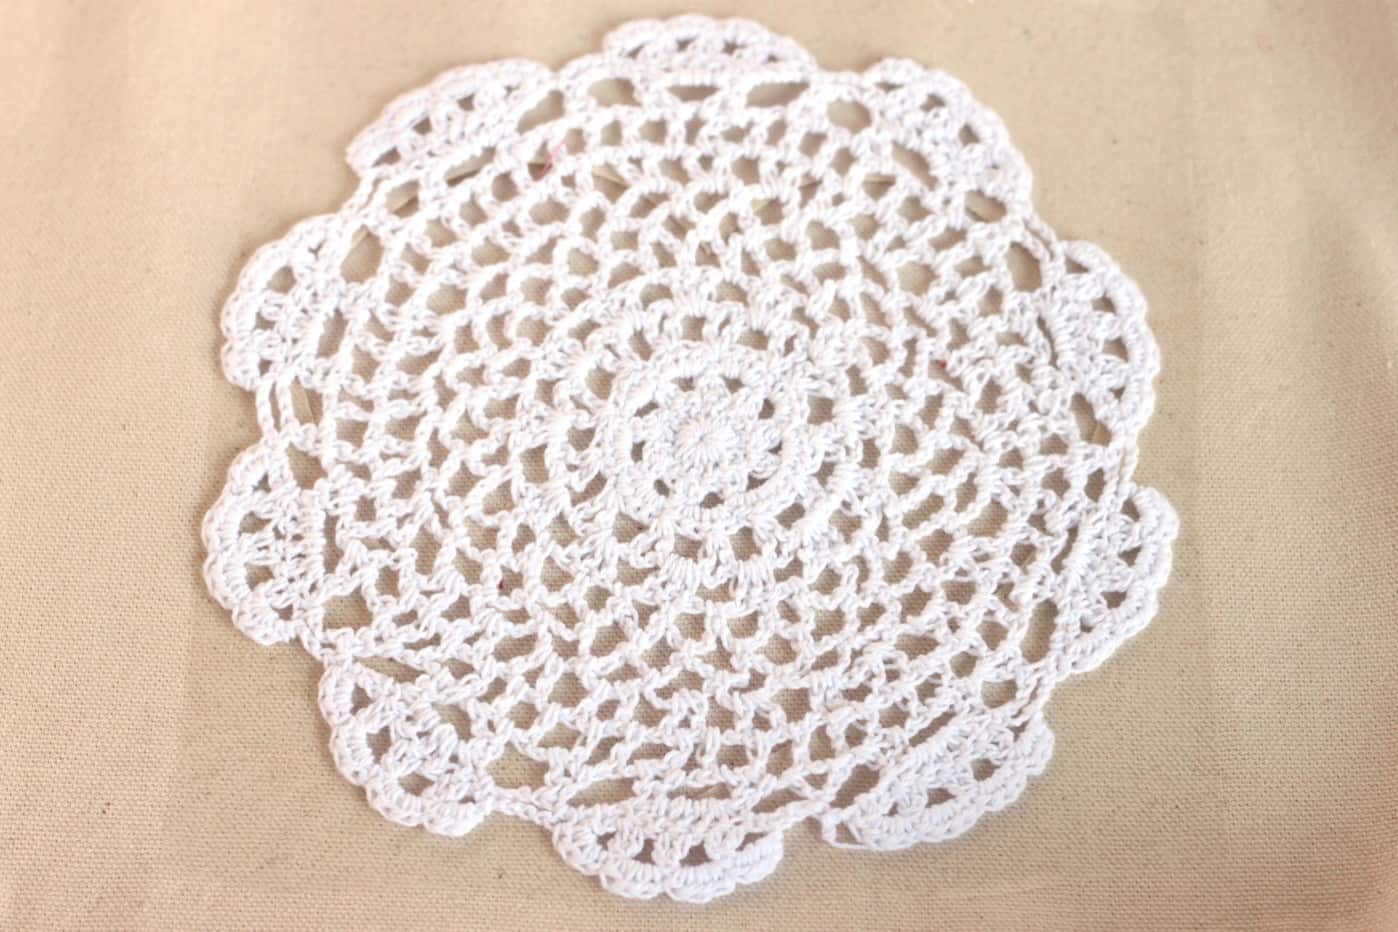 Doily placed over the heart opening